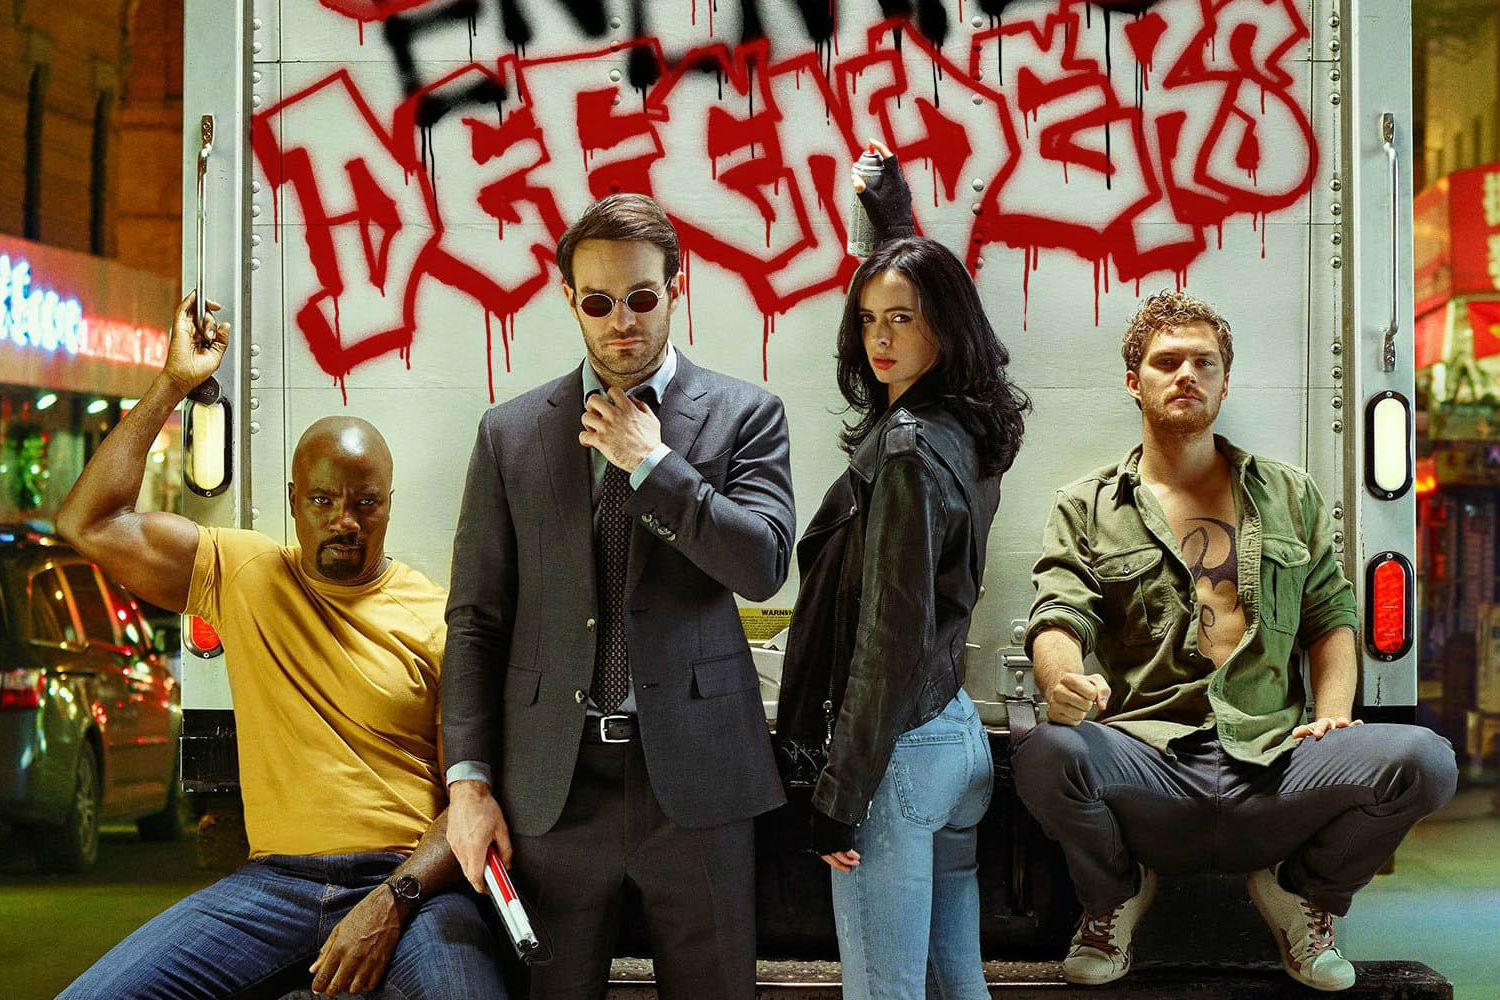 10 things to know about Daredevil and the Marvel / Netflix series